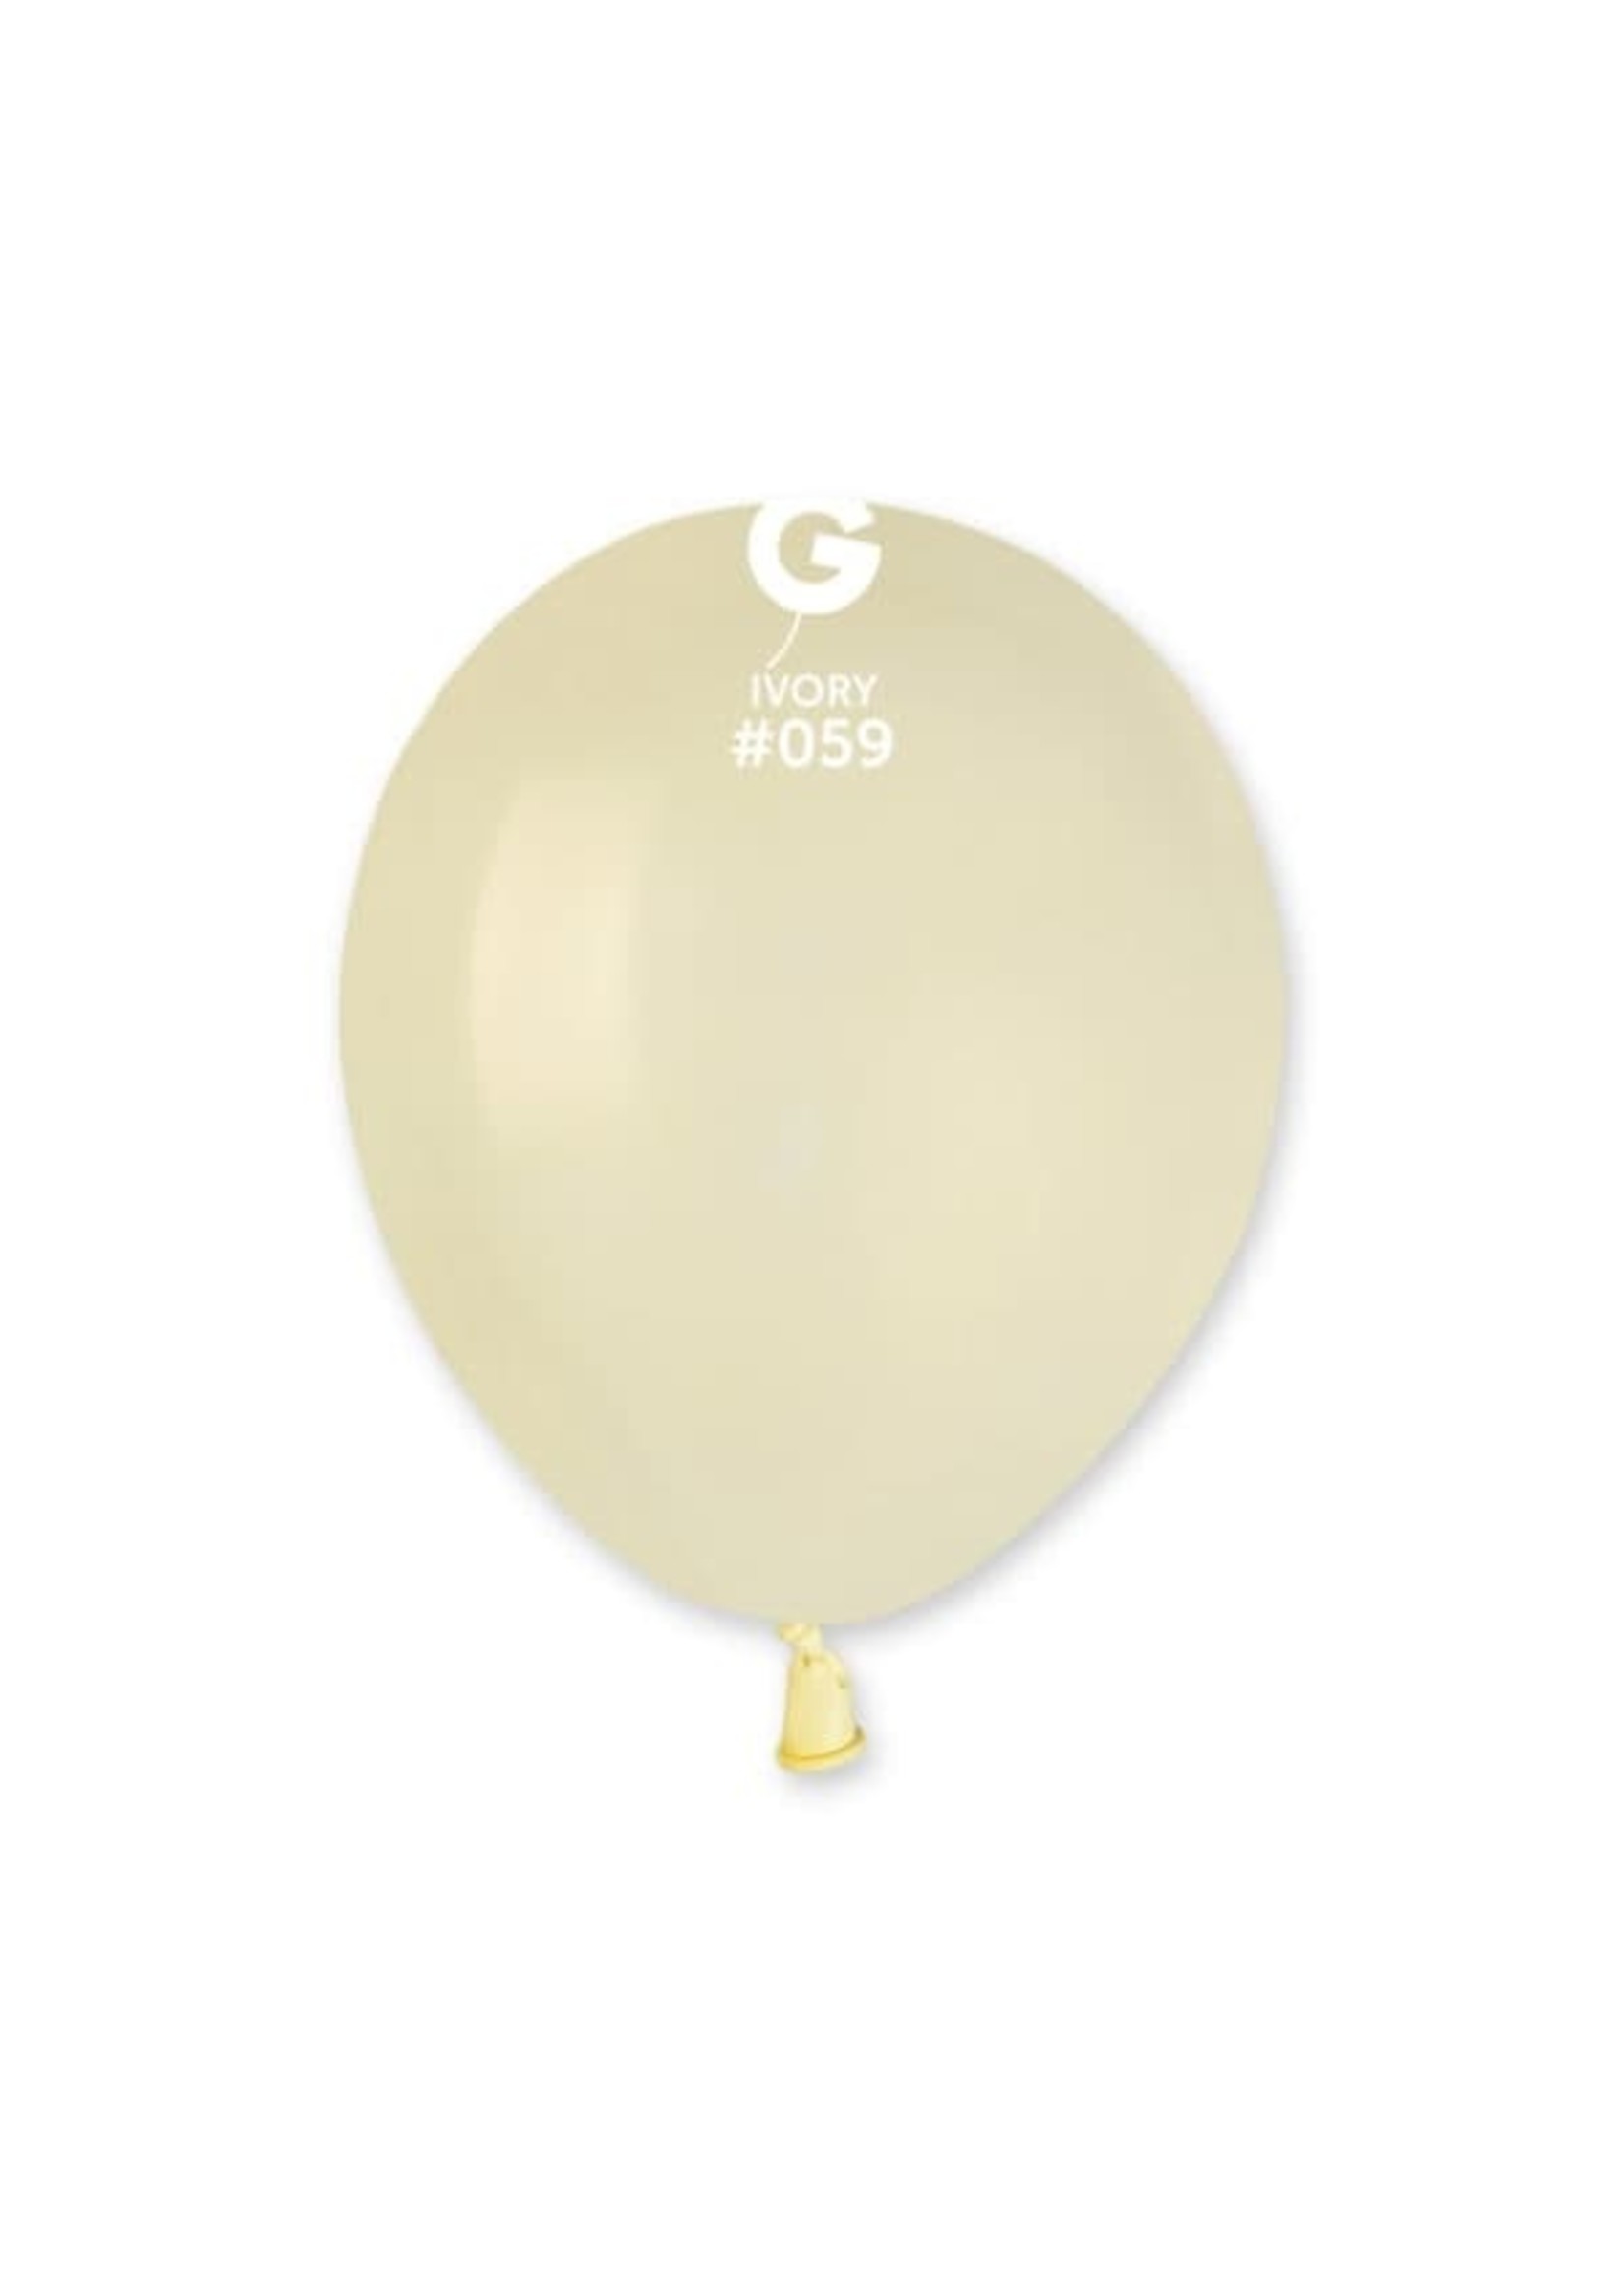 GEMAR Ivory #059 Latex Balloons, 5in, 100ct